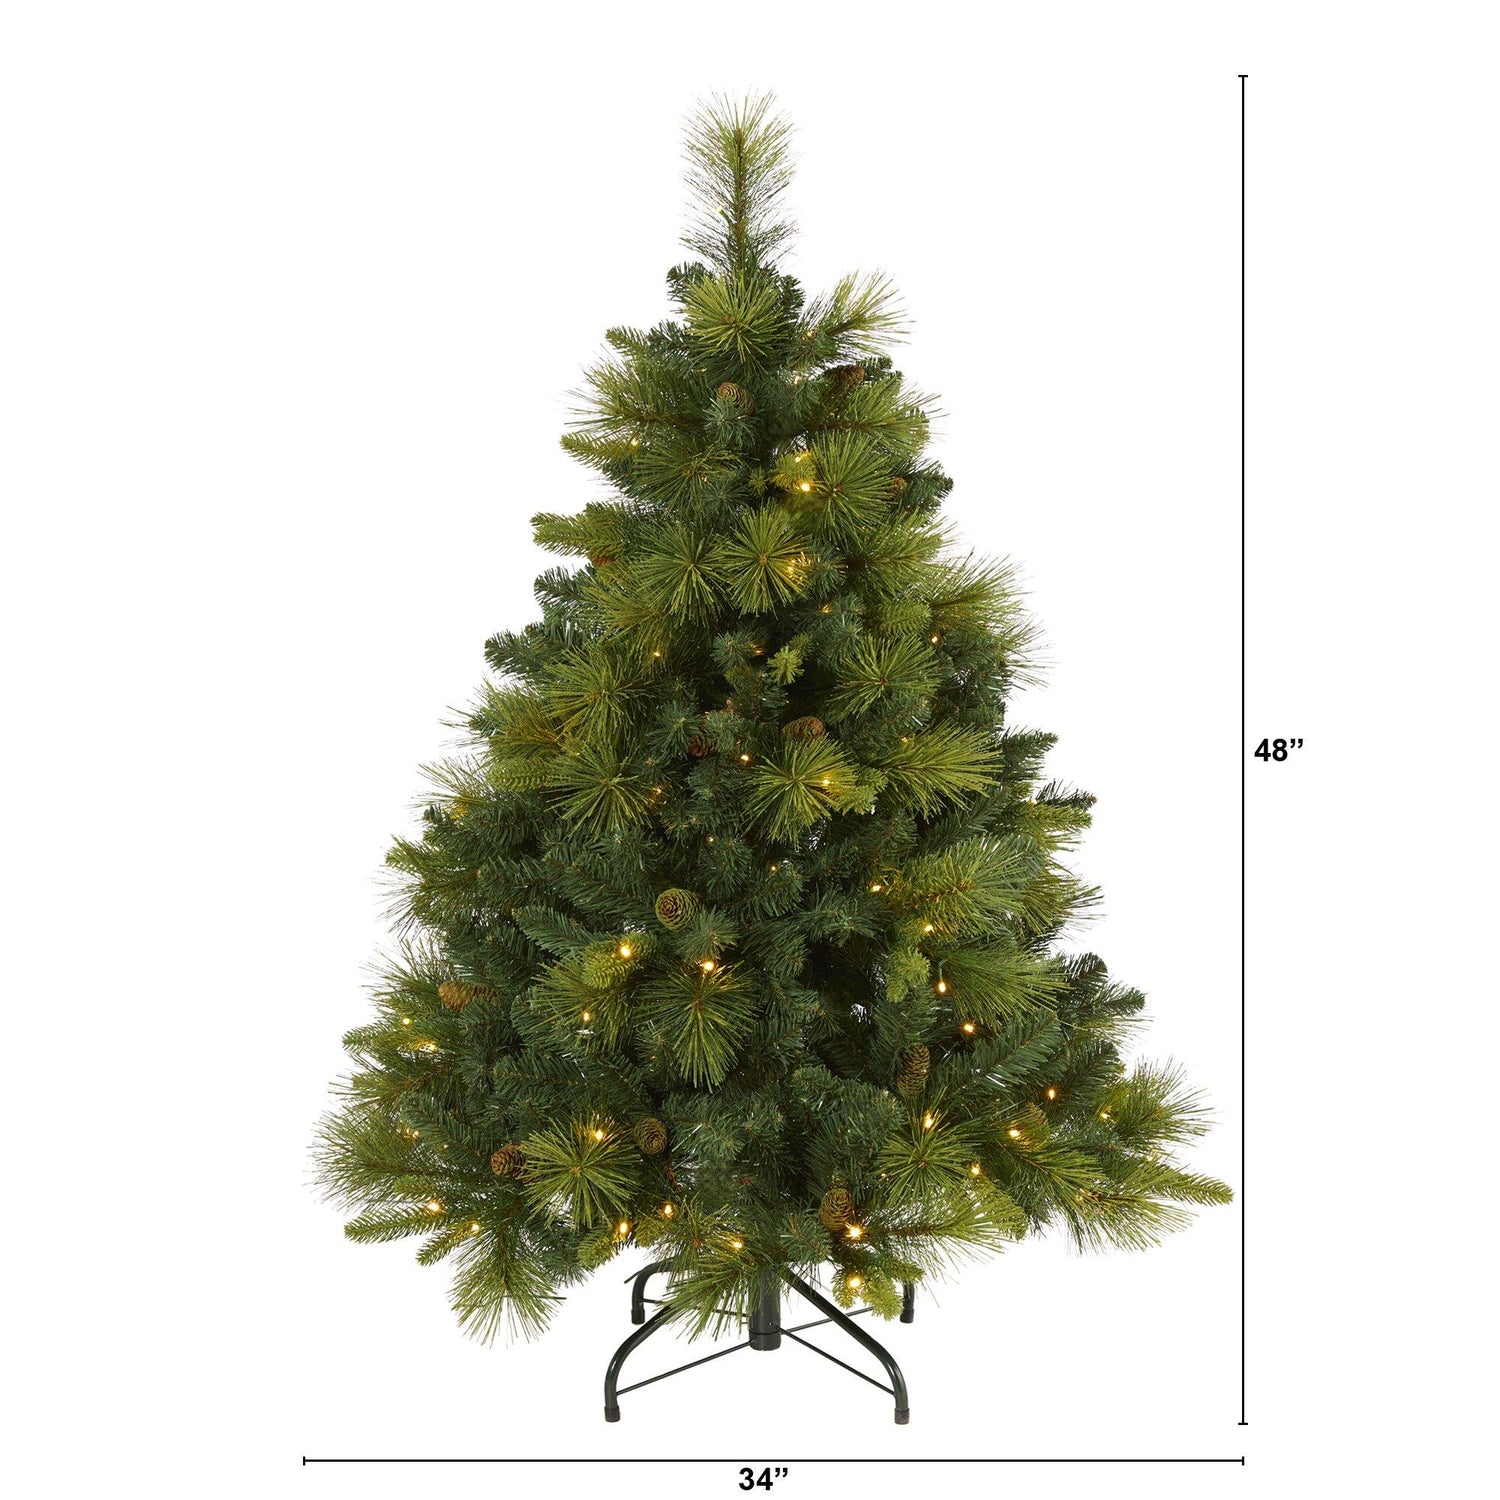 4’ North Carolina Mixed Pine Artificial Christmas Tree with 130 Warm White LED Lights, 459 Bendable Branches and Pinecones